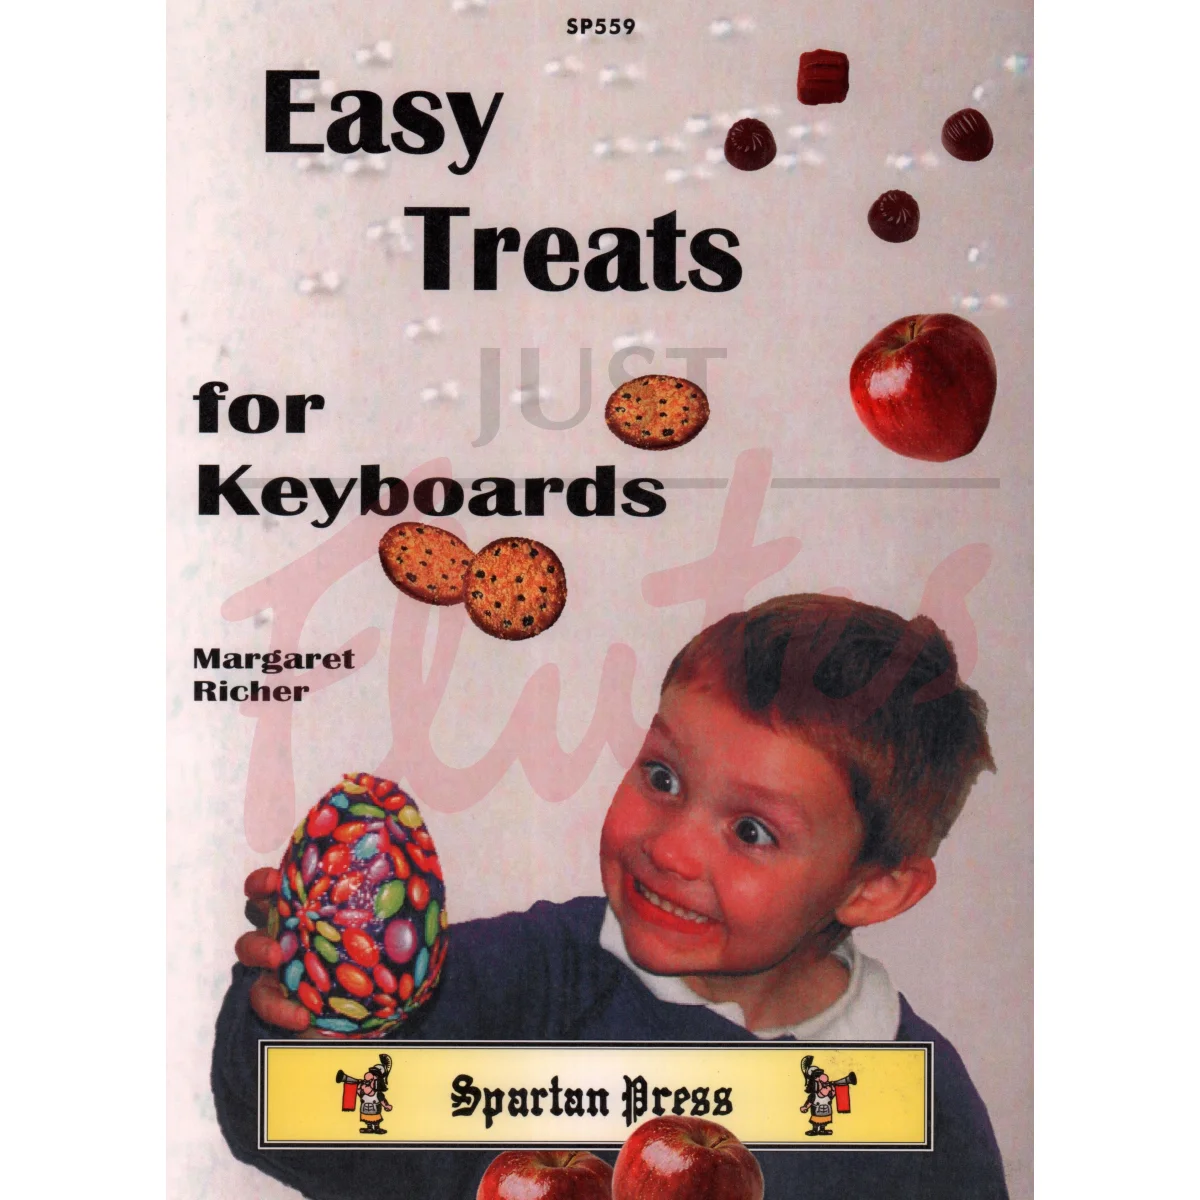 Easy Treats for Keyboards